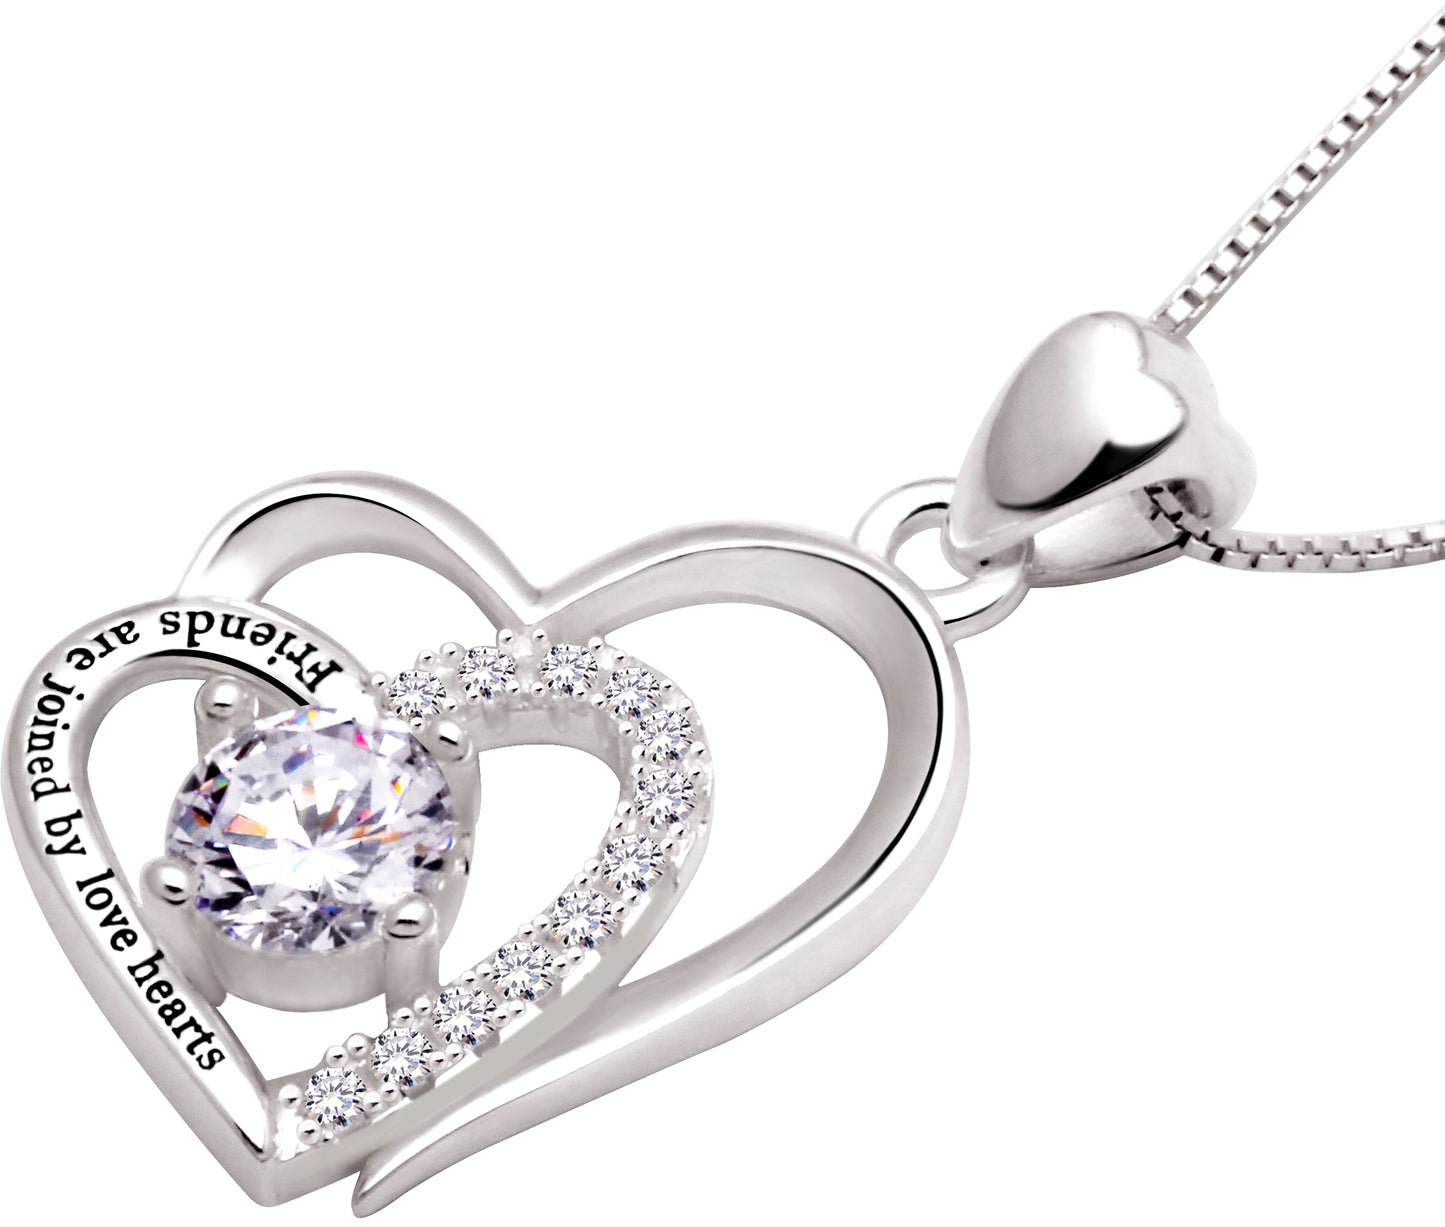 ALOV Jewelry Sterling Silver "Friends are joined by love hearts" Double Love Heart Cubic Zirconia Pendant Necklace